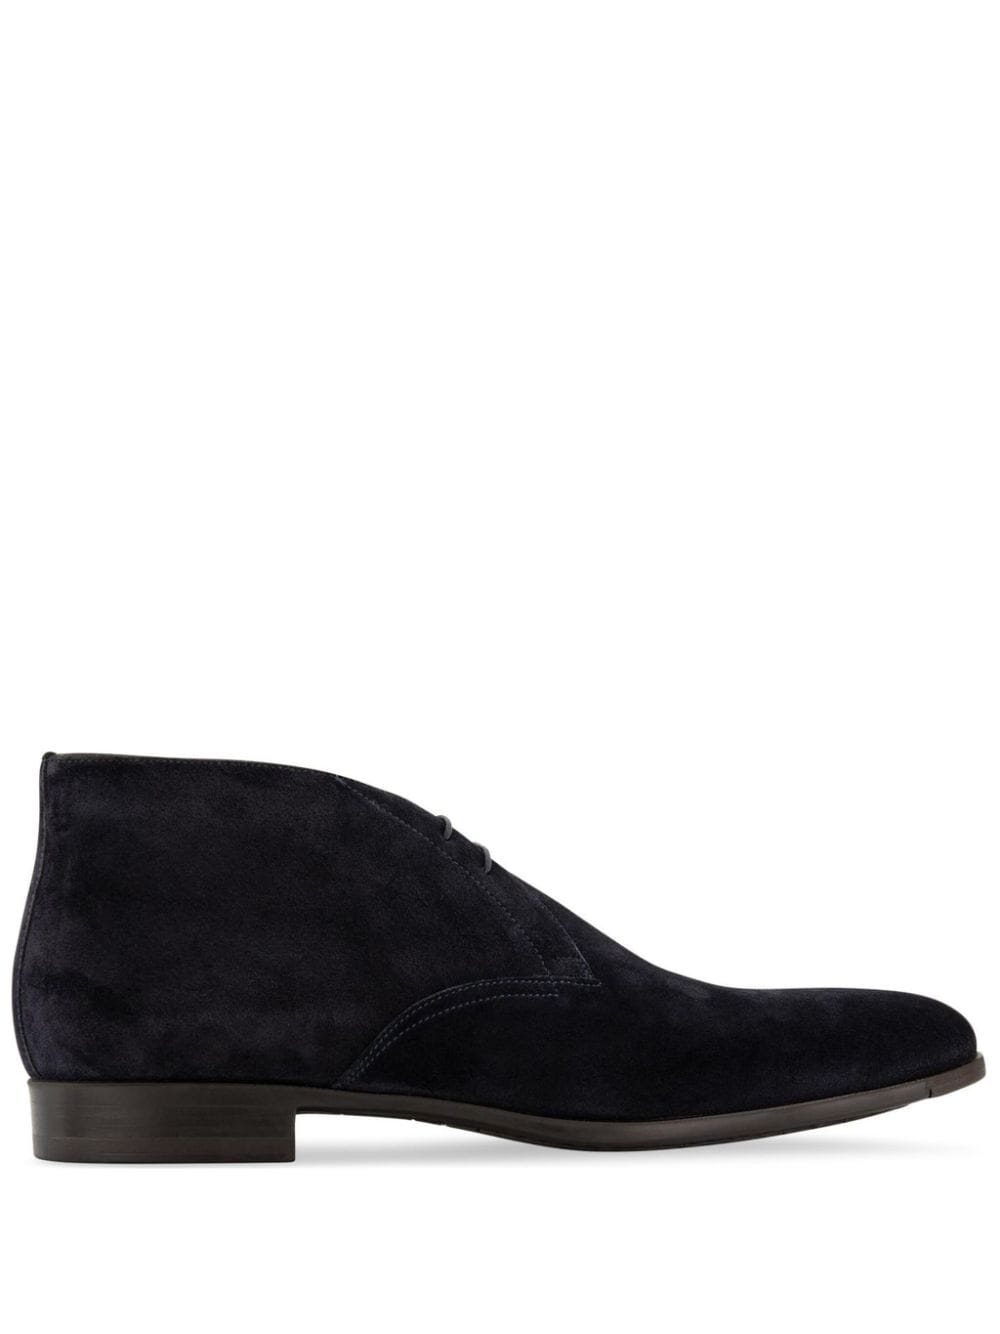 Image 1 of Santoni William suede ankle boots